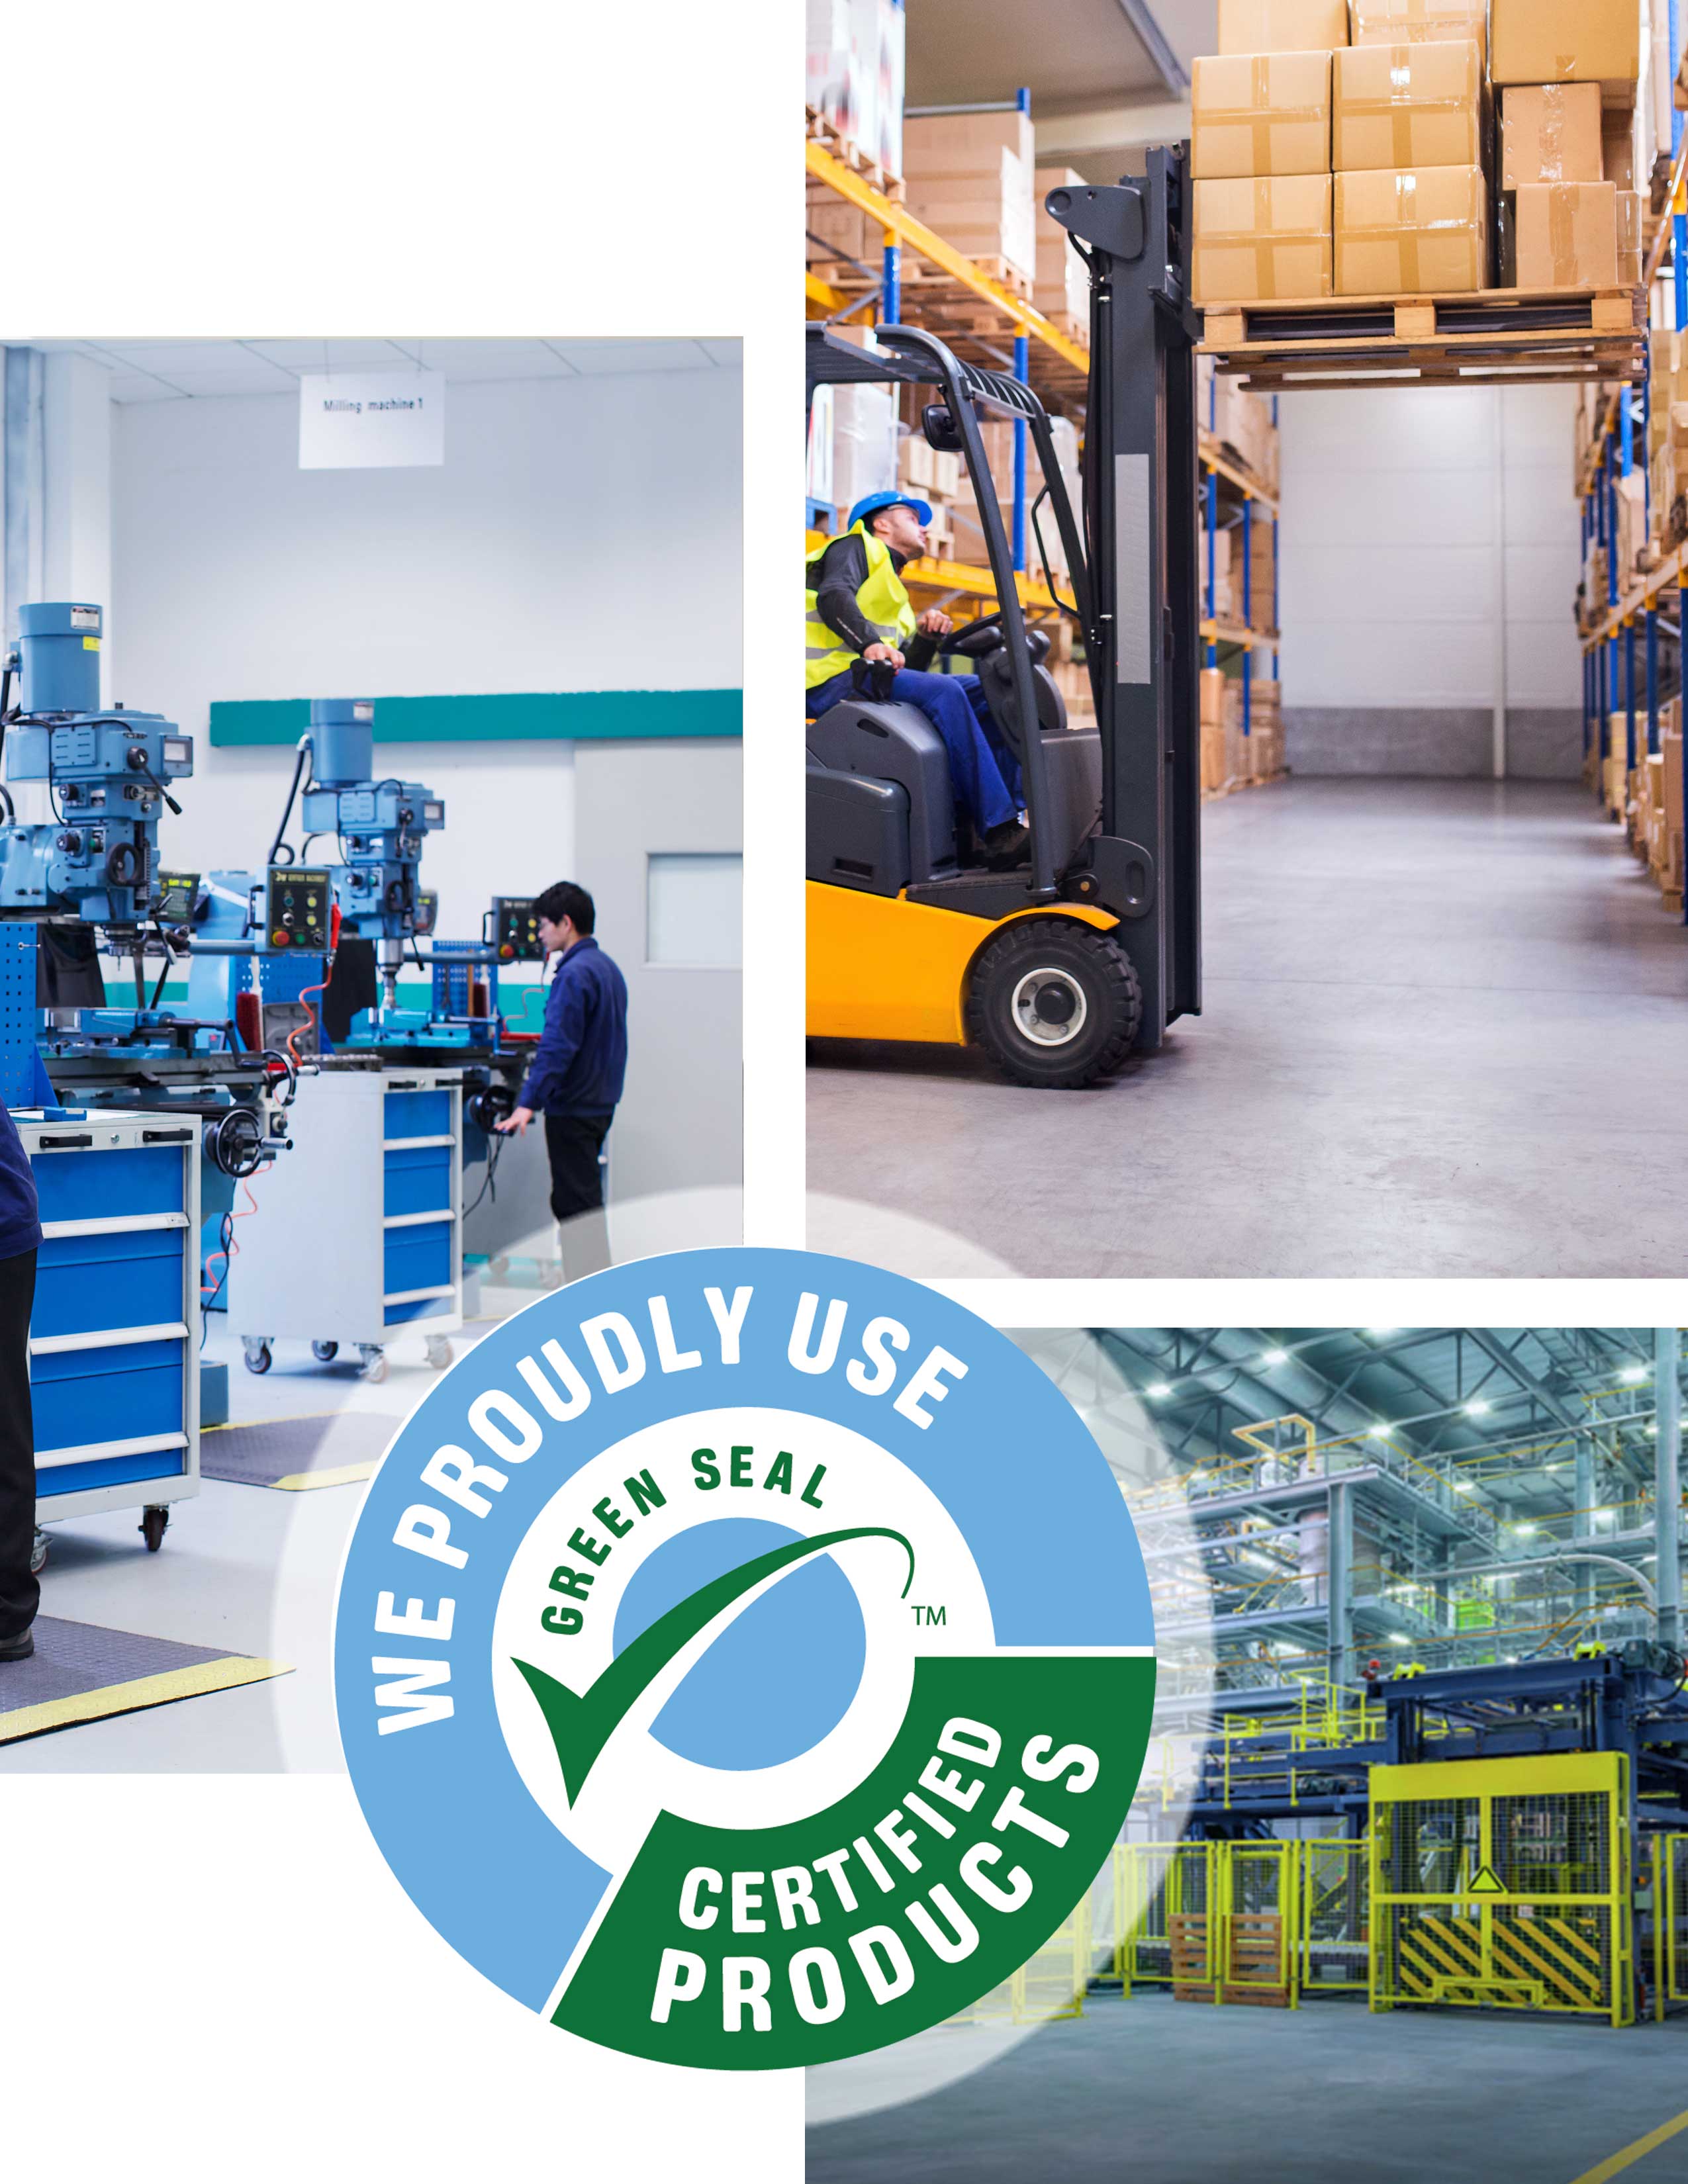 Collage of a Man Using a Machine in a Warehouse, a Man Driving a Forklift, Warehouse Pipes and Machines, and Green Seal Logo